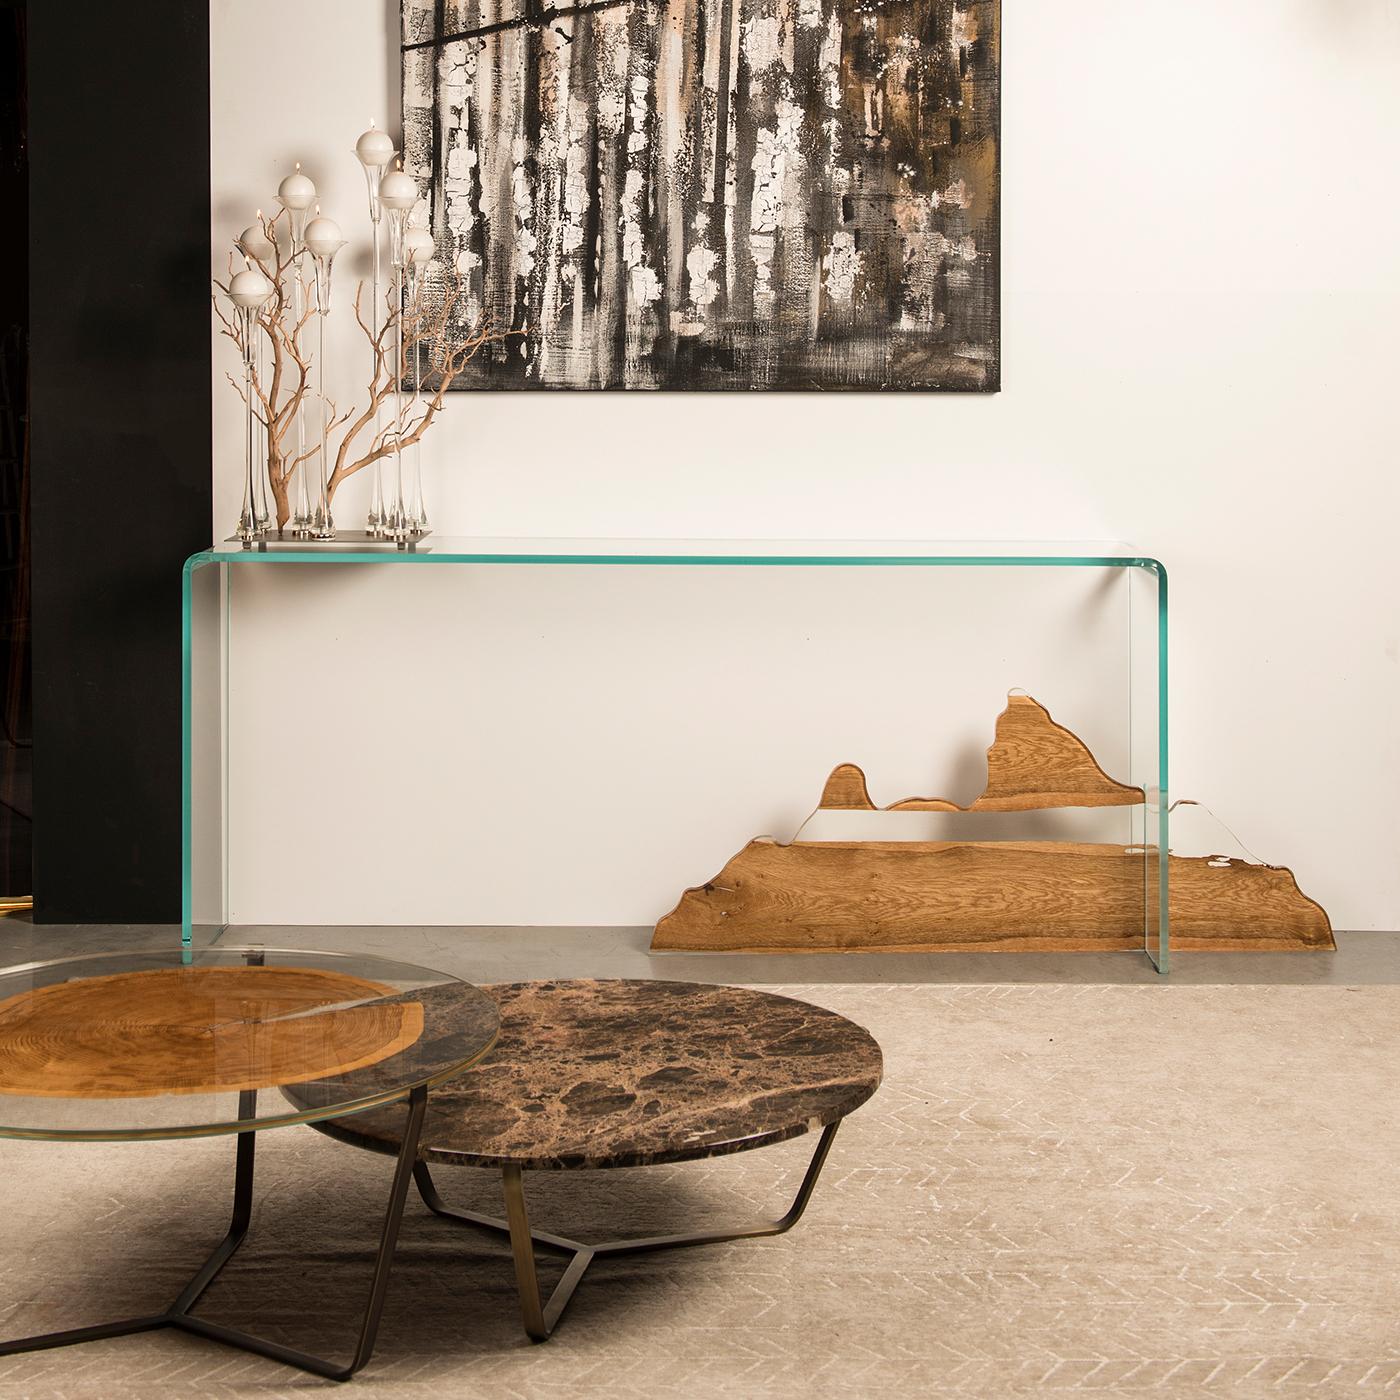 Inspired by the altar table, the place of worship in Chinese homes or Buddhist temples, this minimalist console designed by Lea Chen symbolizes the harmonious balance of forms and materials. Crafted of glass by Venetian artisans, one leg of the